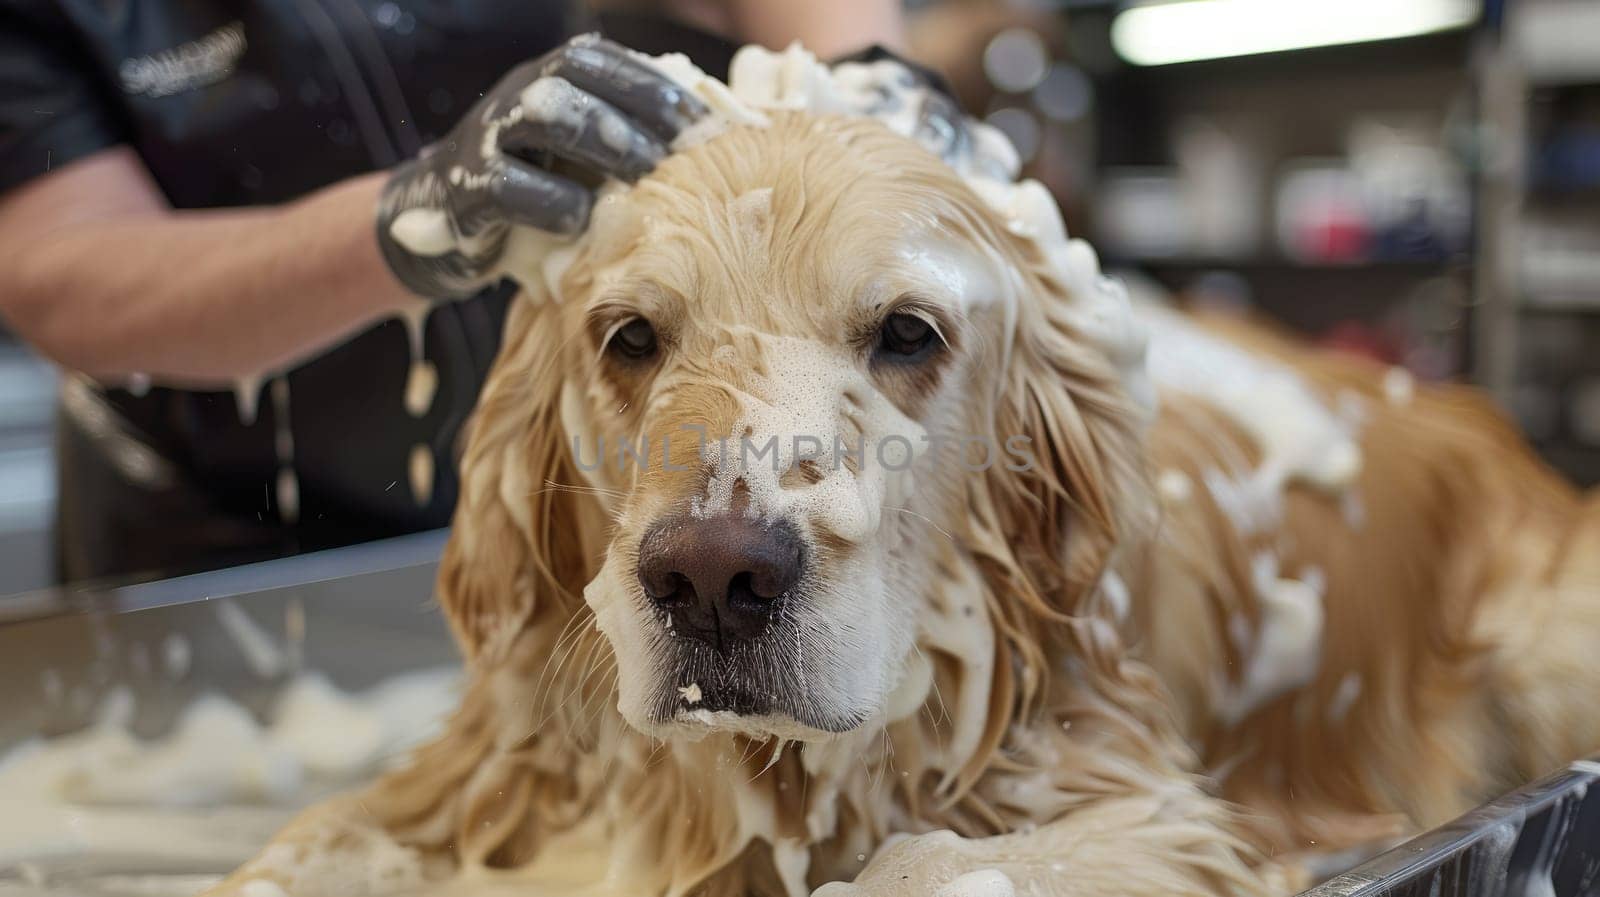 A dog receiving a grooming session at a pet salon, Groomed by professional at pet salon, Pet care.